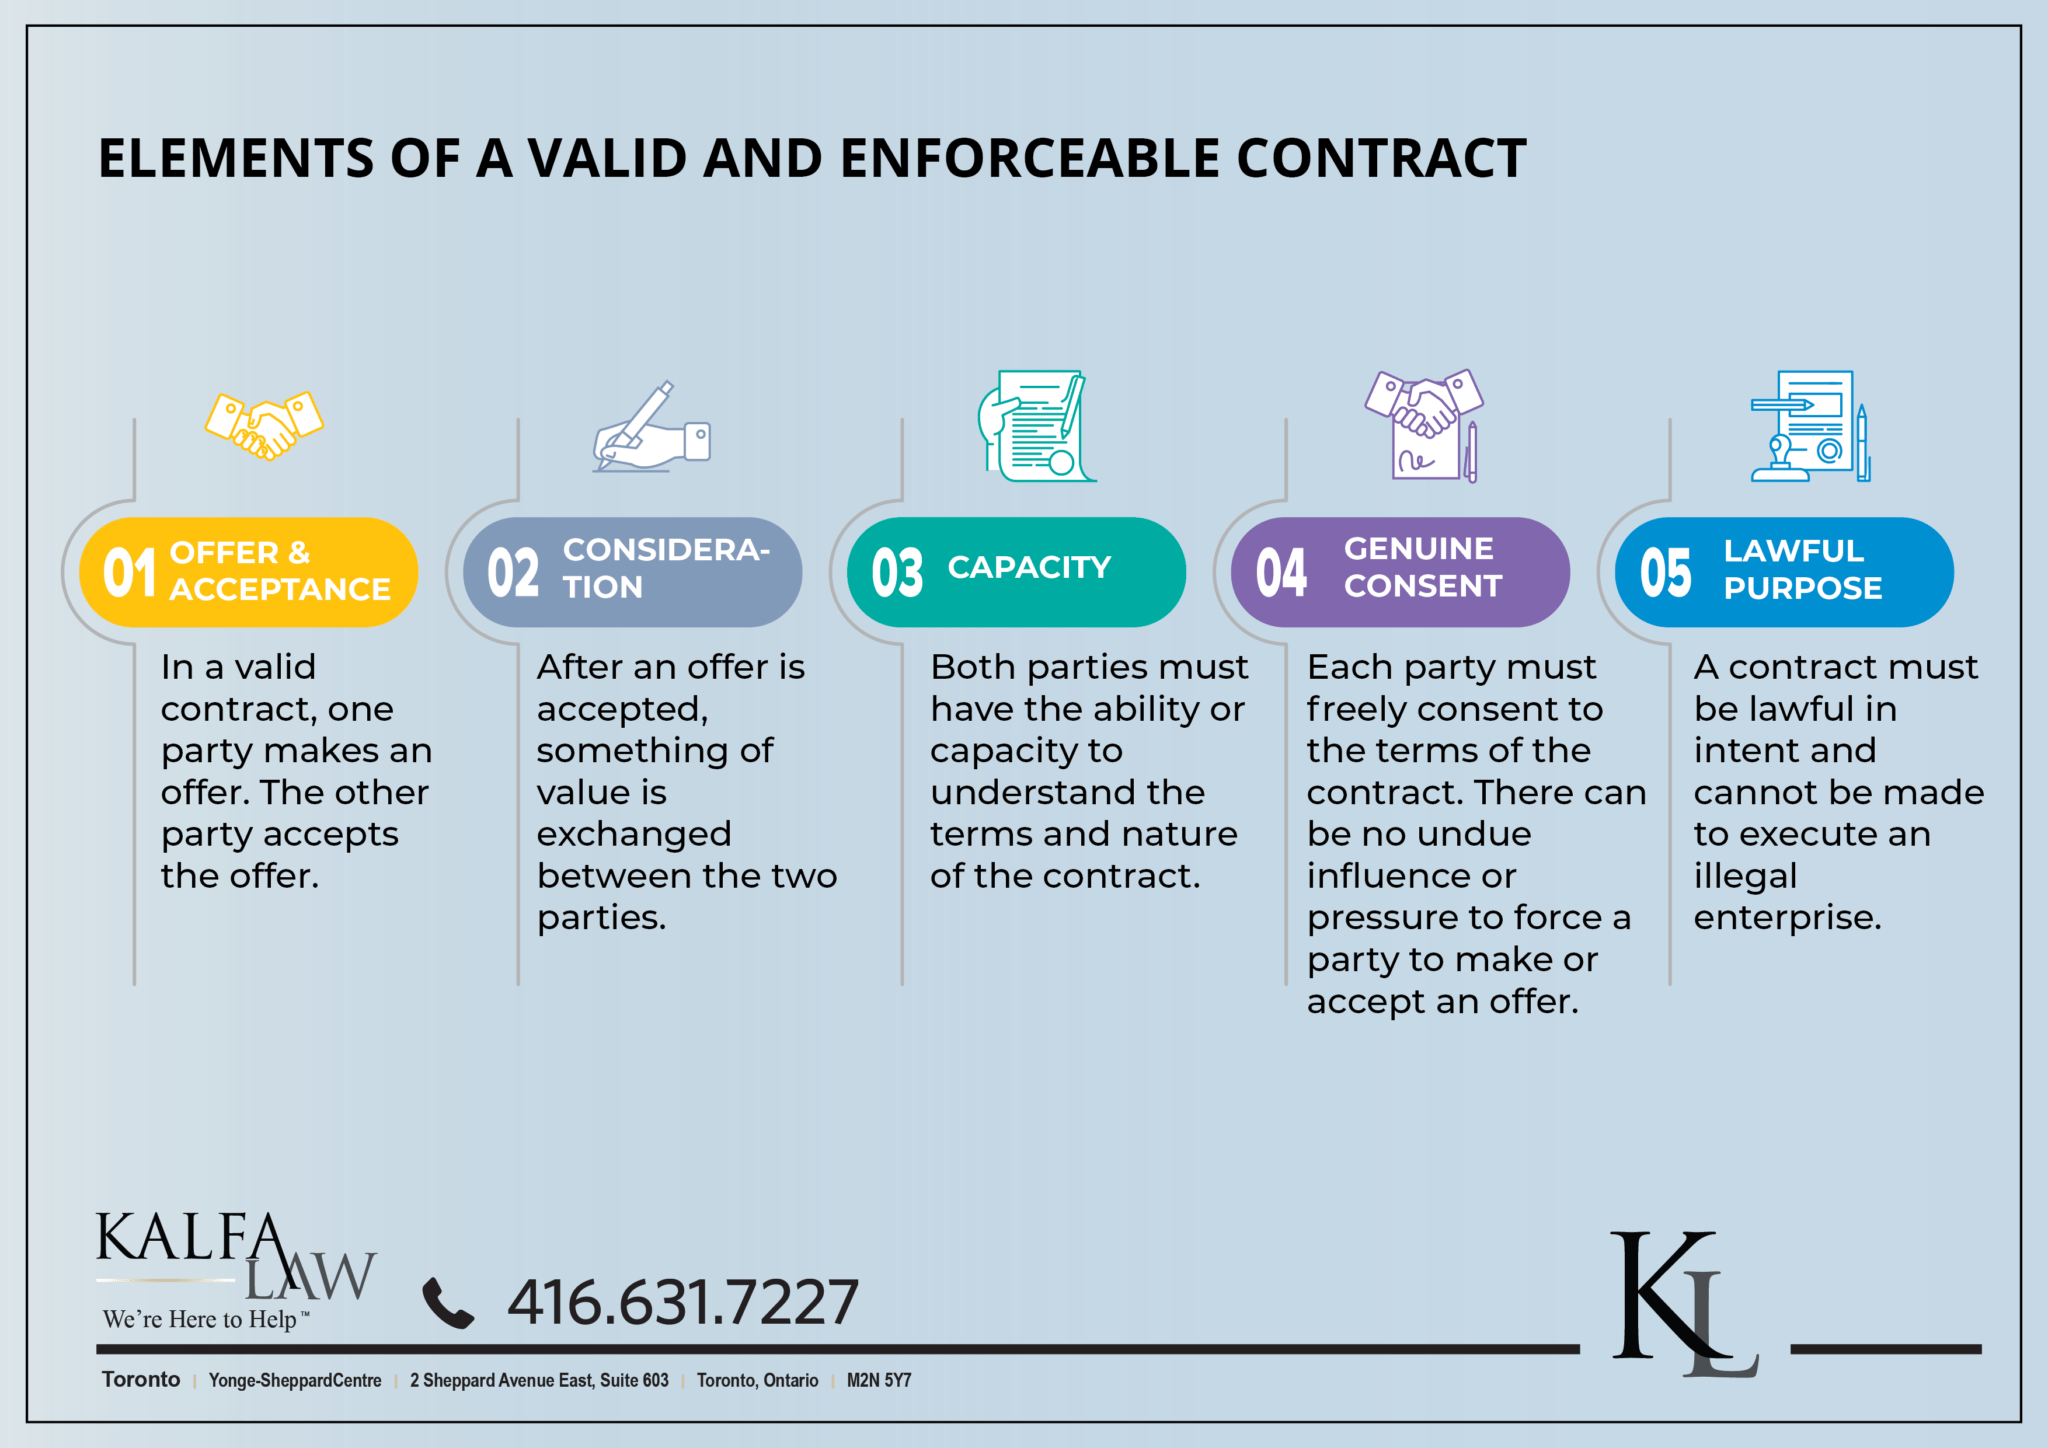 kalfa-law-firm-business-contracts-enforceable-contracts